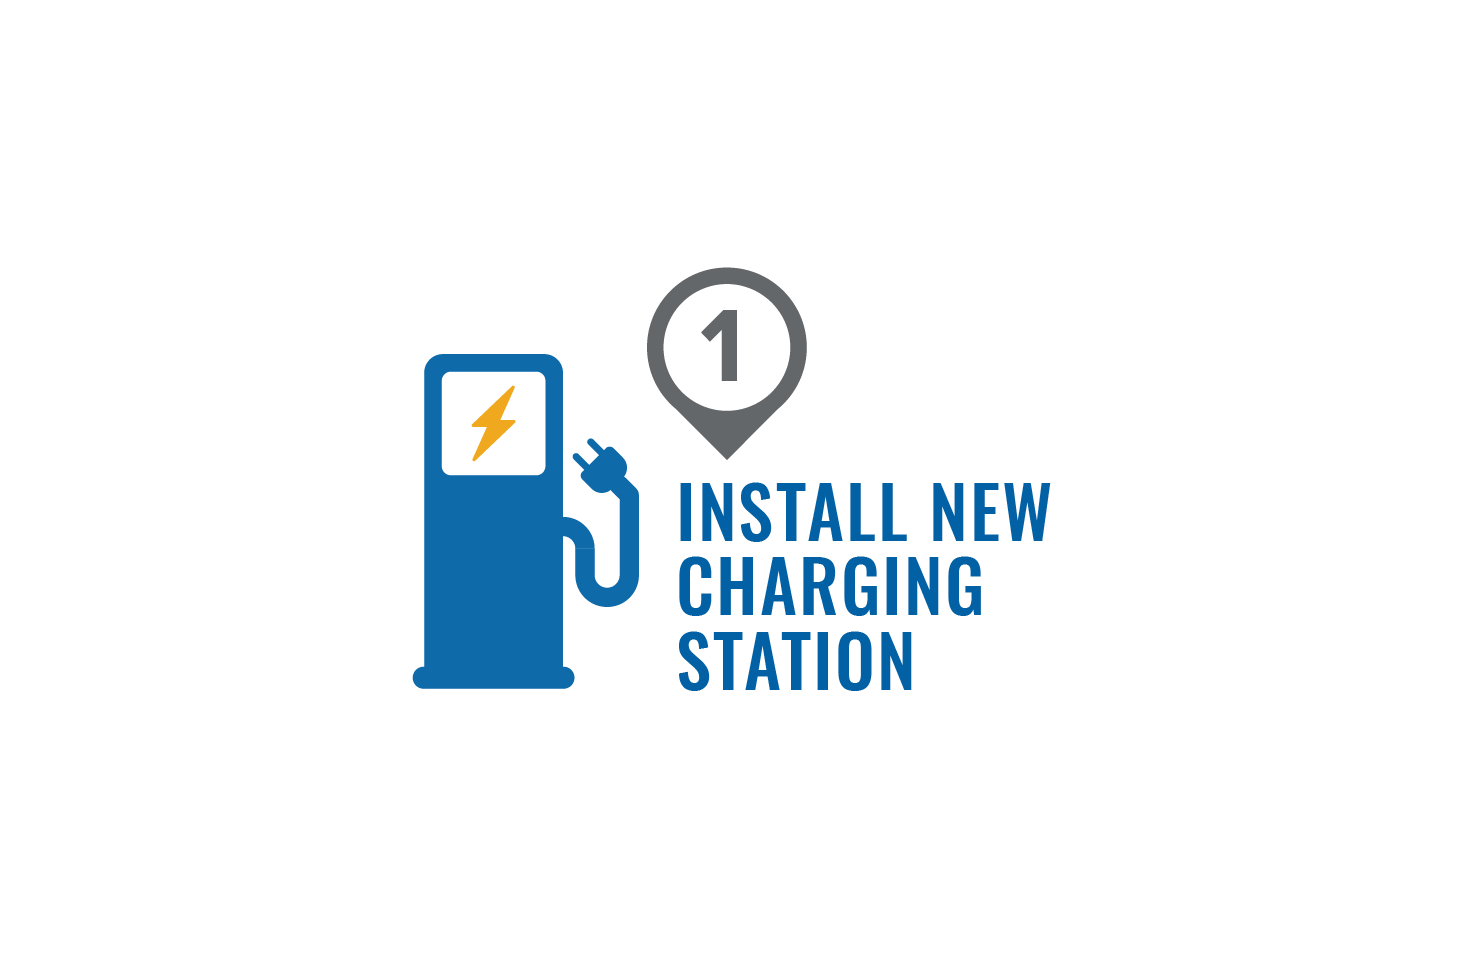 Step 1 - Install New Charging Station